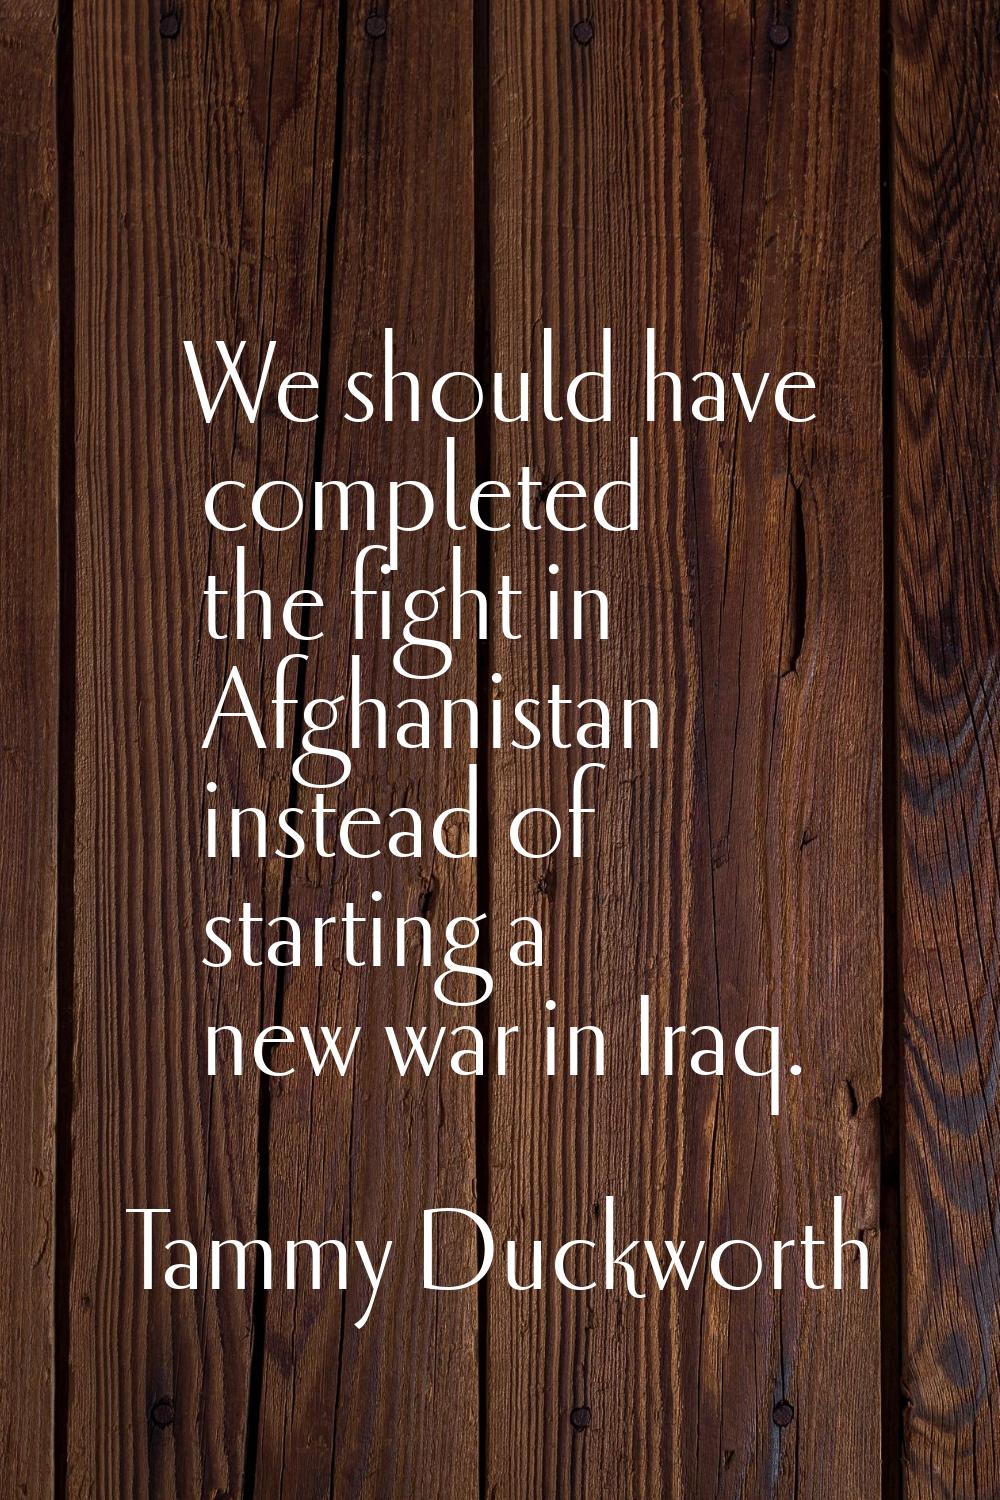 We should have completed the fight in Afghanistan instead of starting a new war in Iraq.